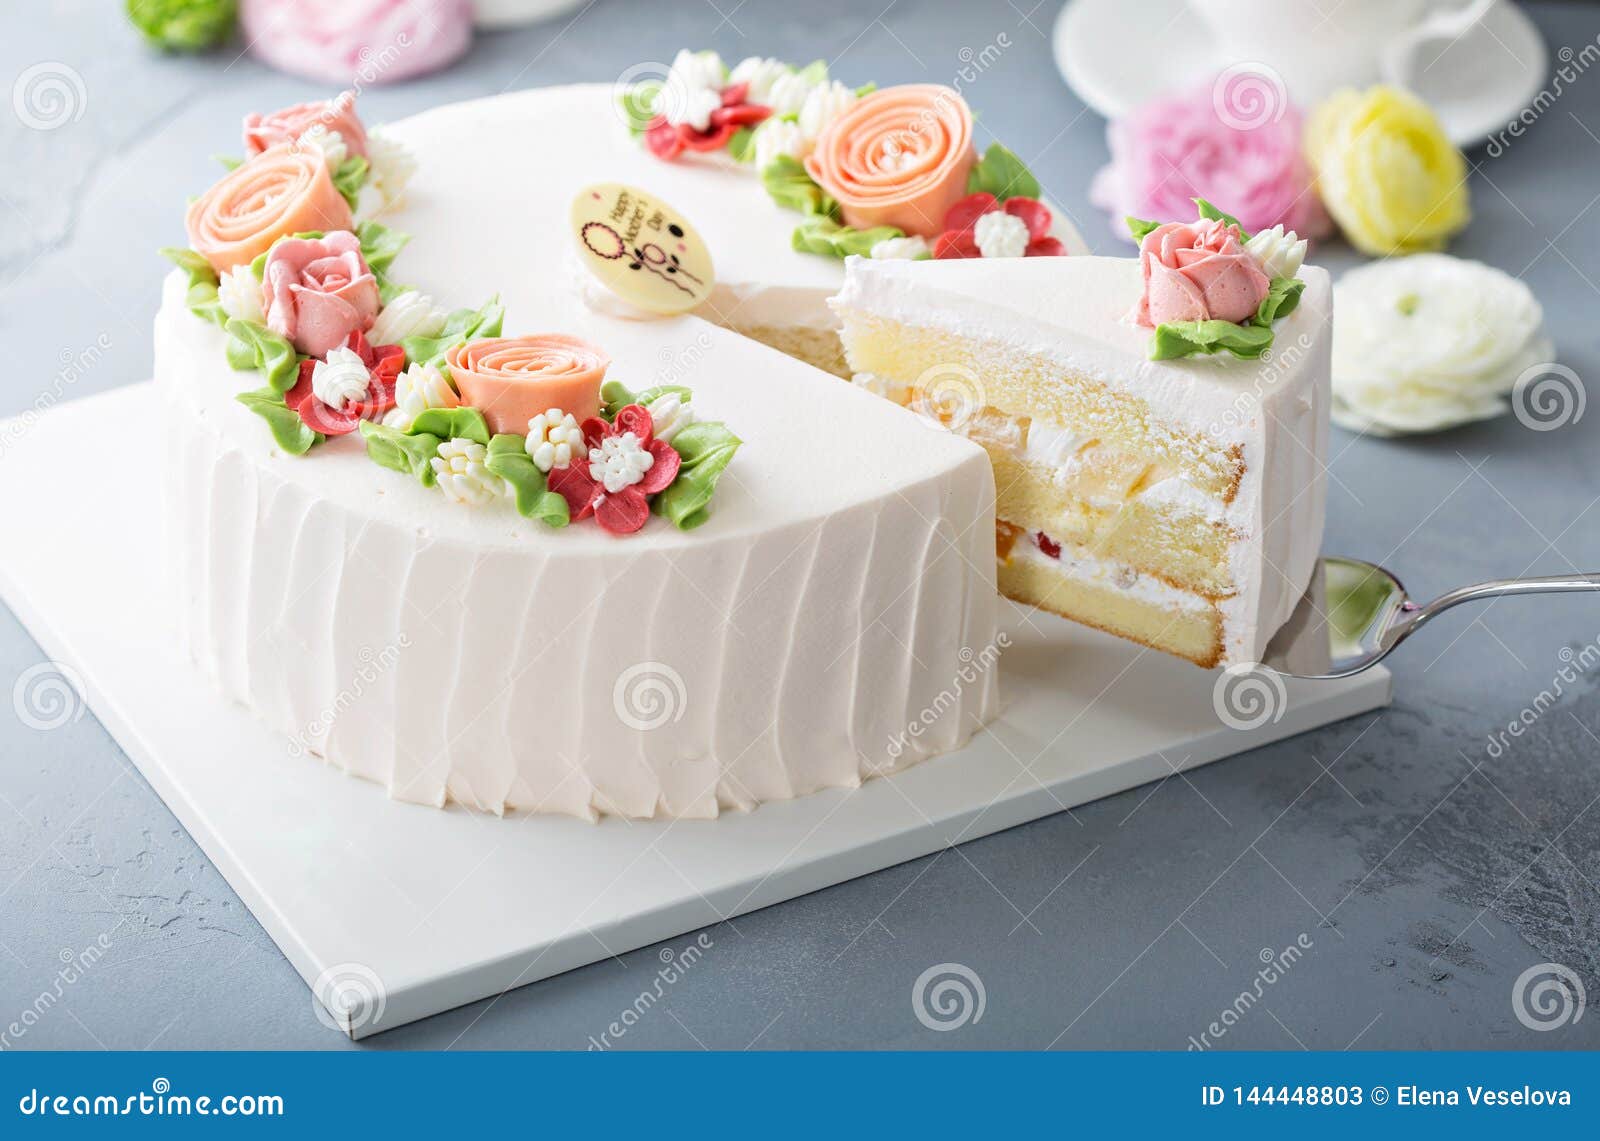 Mothers Day Cake with Flowers Stock Image - Image of letters ...